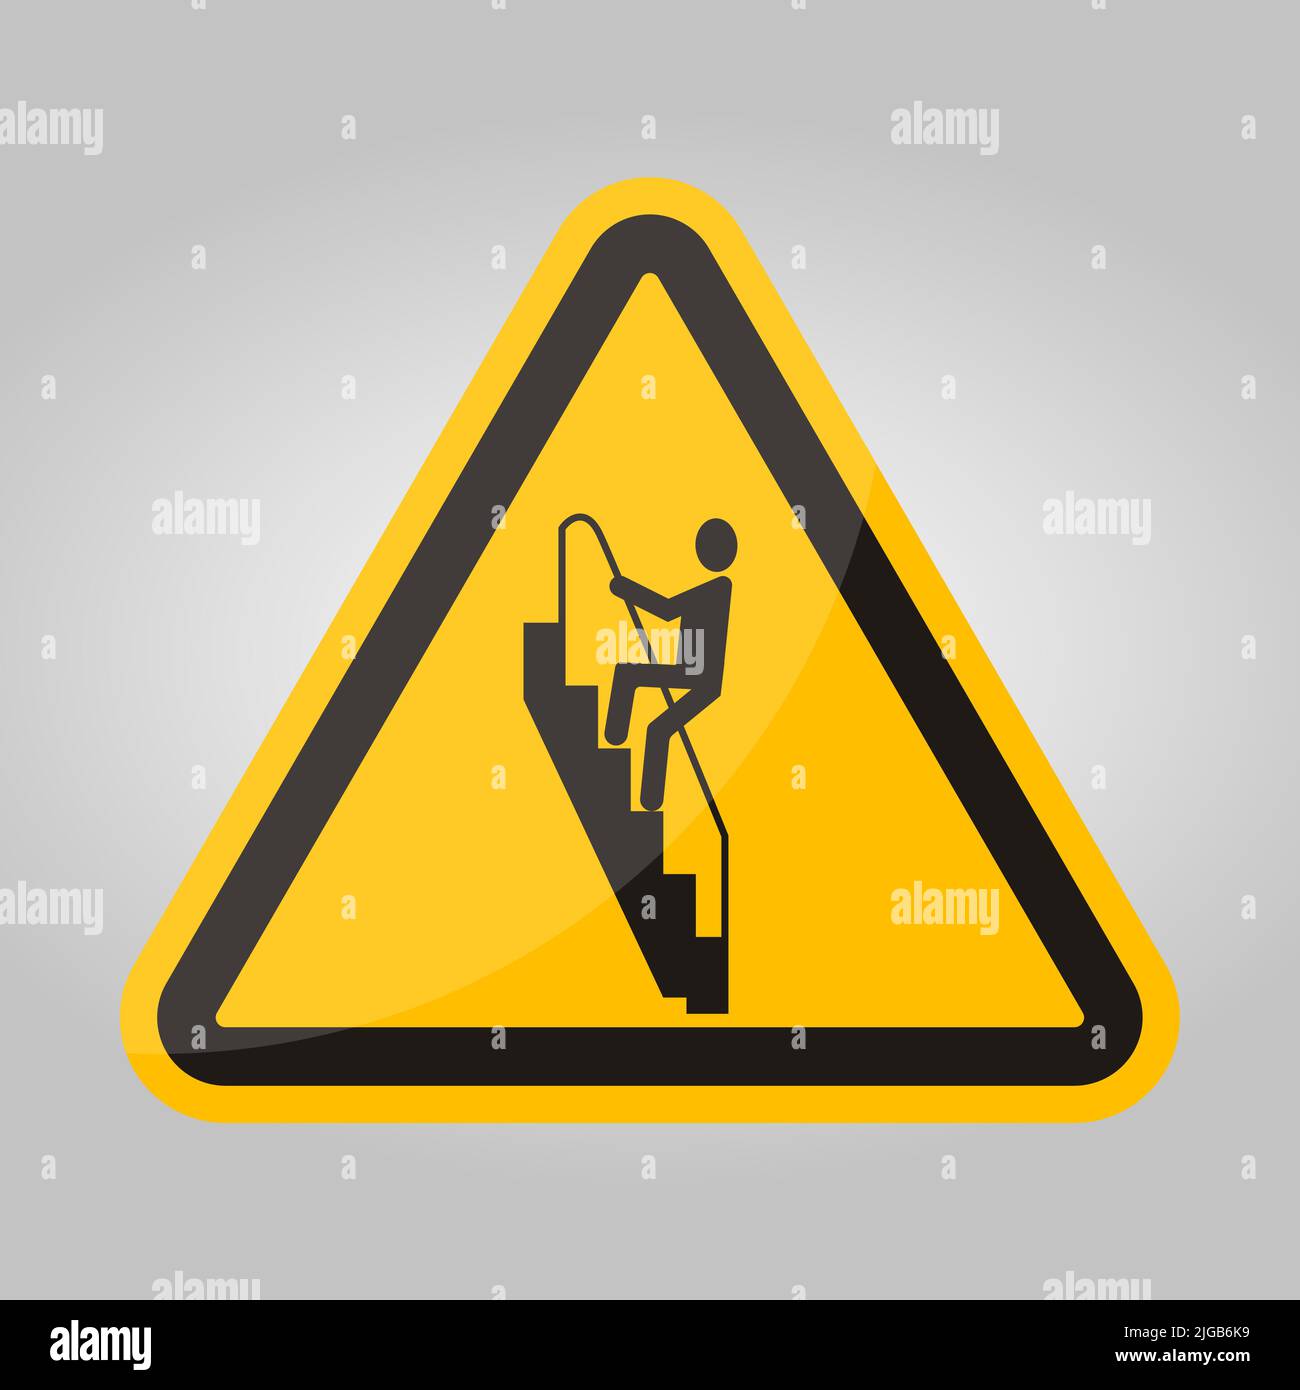 Caution Walk Down Stairs Backwards Sign Stock Vector